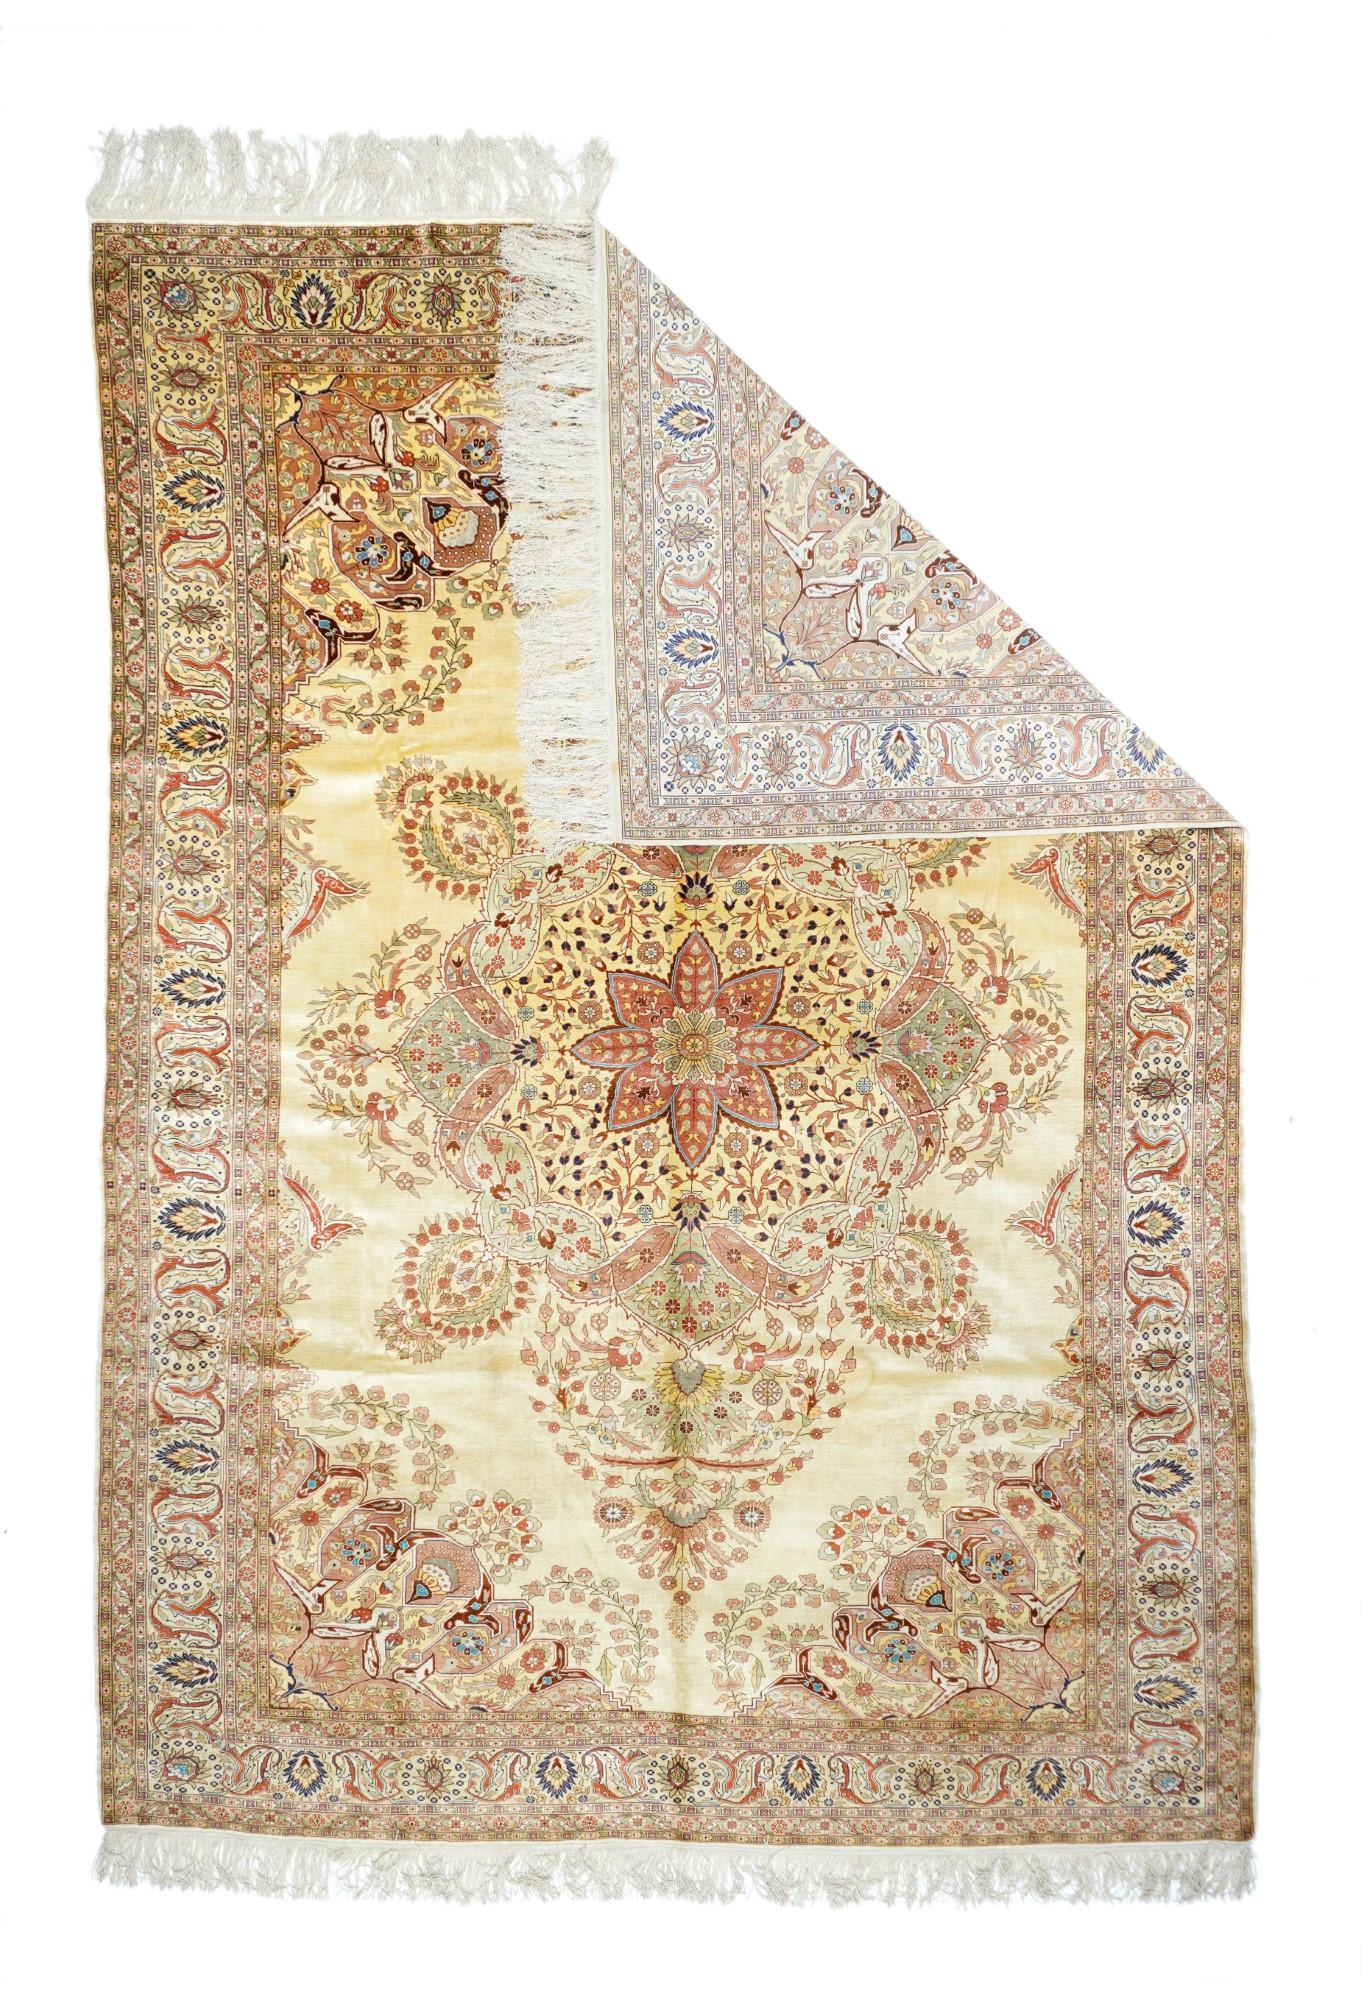 Vintage Herekeh rug measures 6'5'' x 9'6''. A lightly-toned, finely woven Turkish city small carpet in as strongly Kirman-influenced style. The sandy-straw semi-open field shows a complex medallion of flower sprays, boteh leaves, serrated sickle